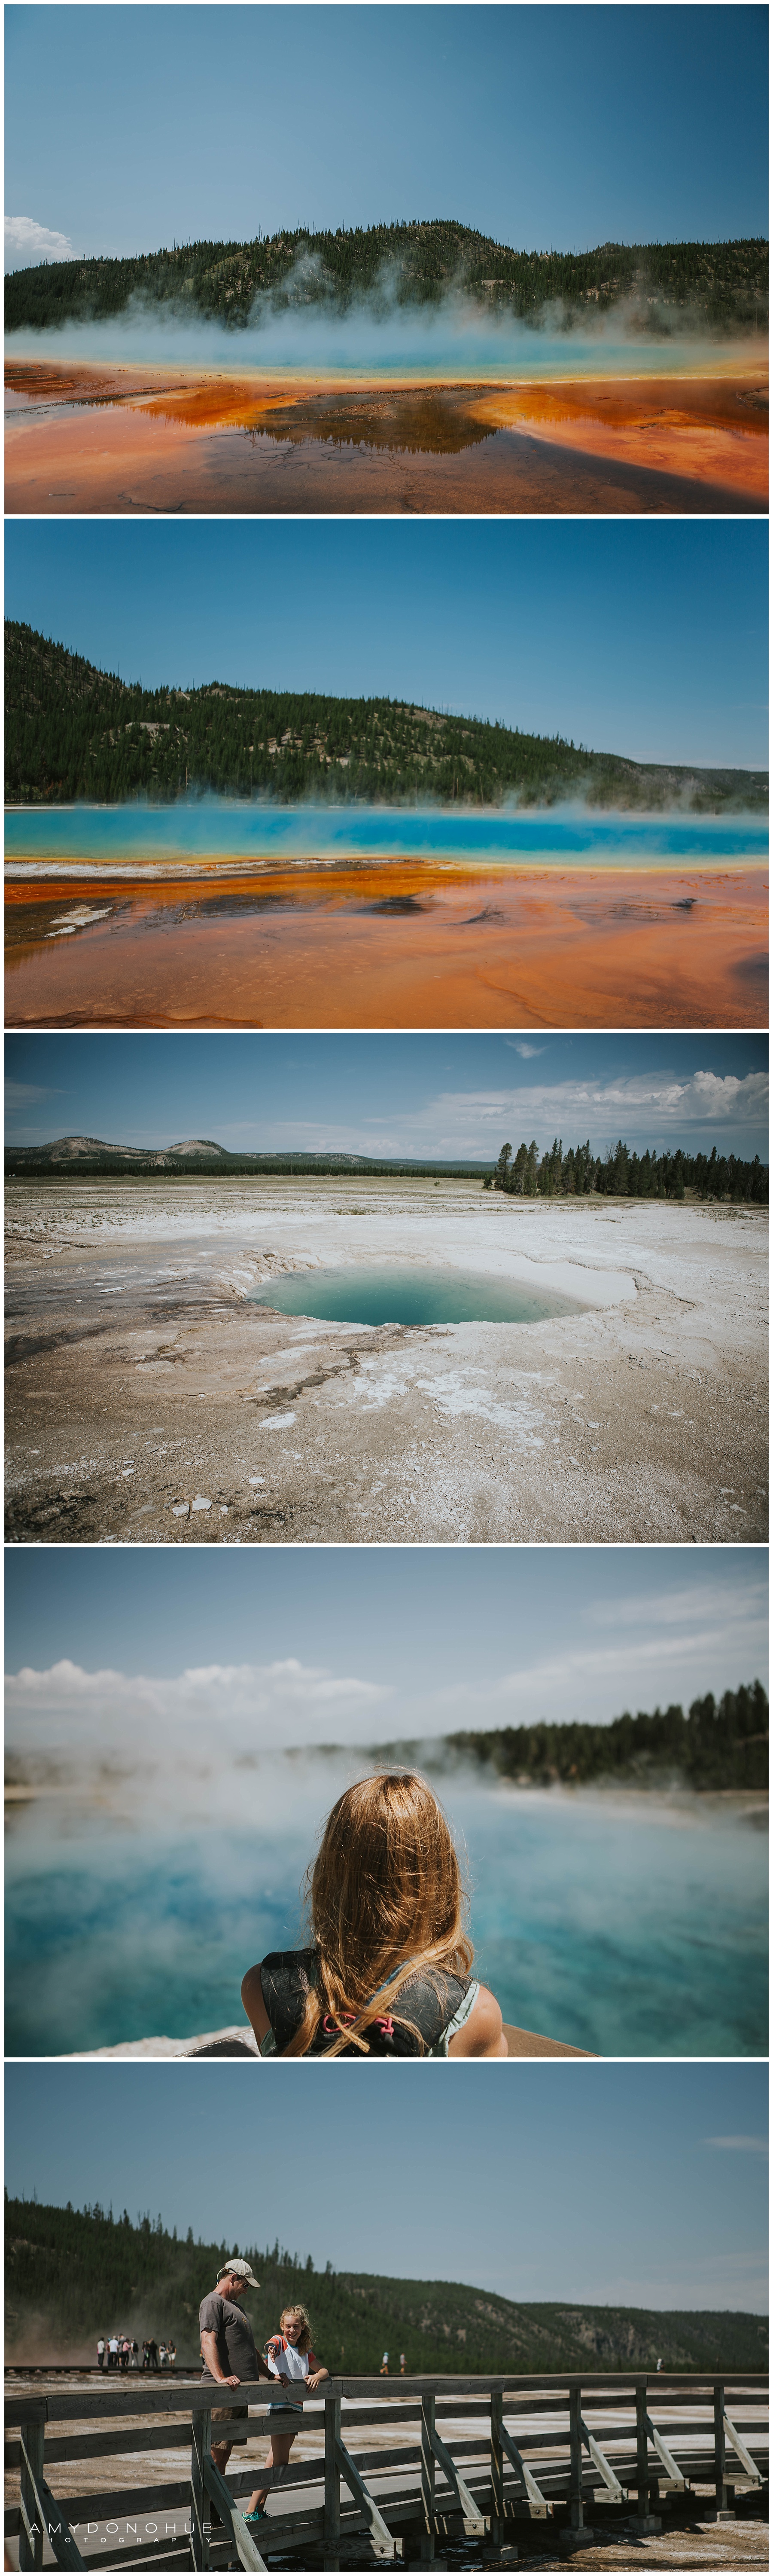 © Amy Donohue Photography | Yellowstone National Park